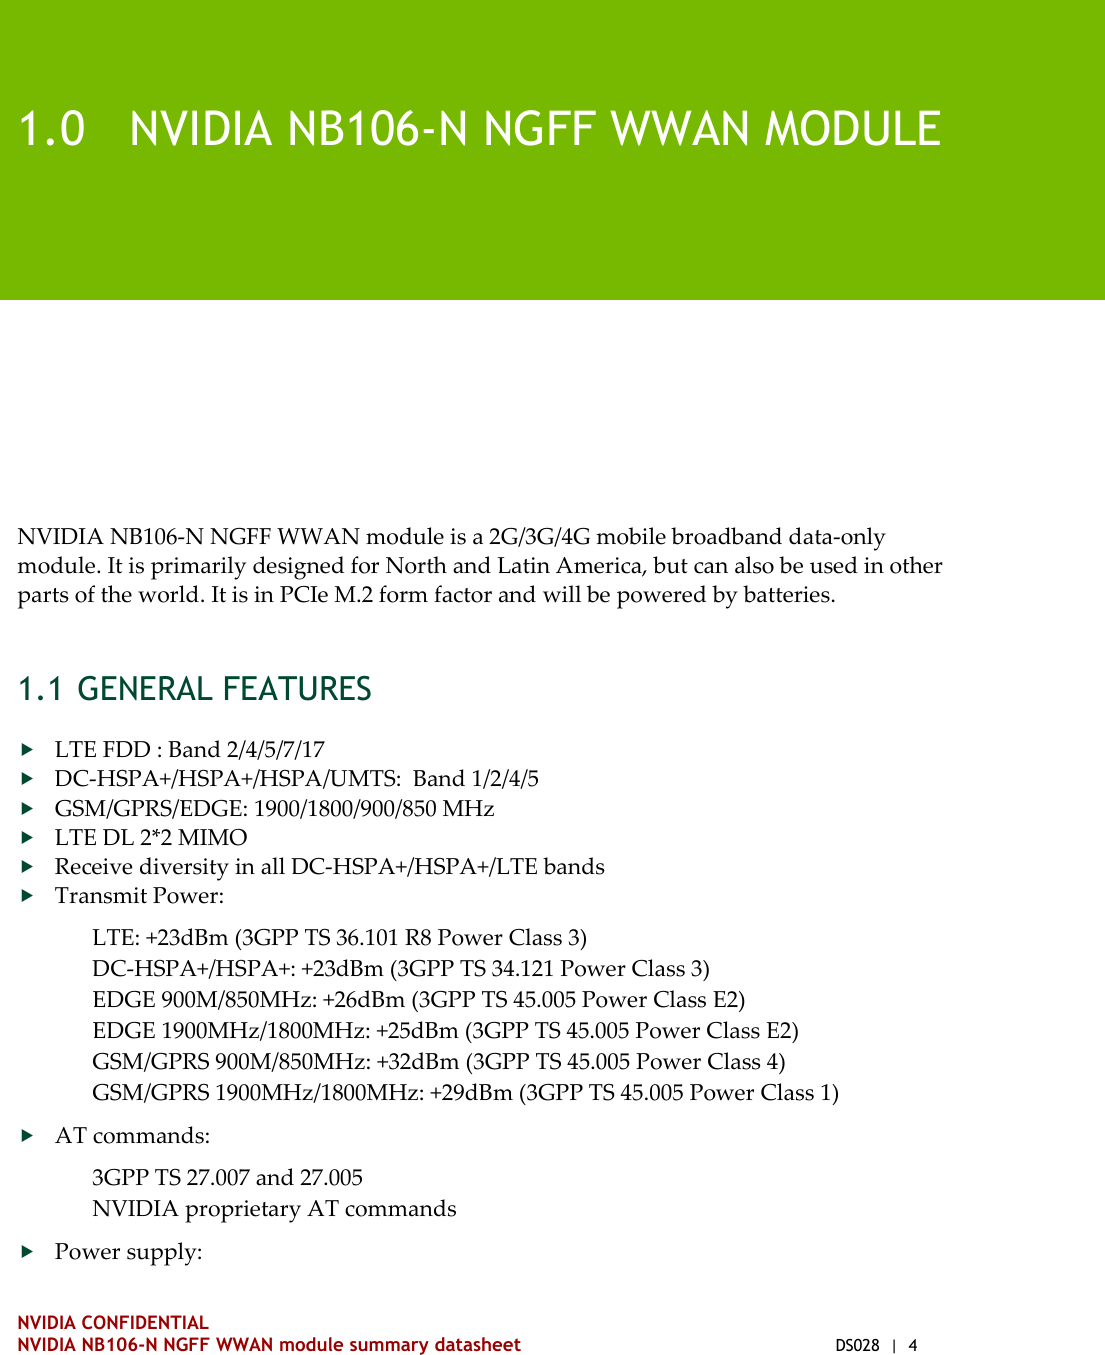    NVIDIA CONFIDENTIAL NVIDIA NB106-N NGFF WWAN module summary datasheet  DS028  |  4   1.0 NVIDIA NB106-N NGFF WWAN MODULE NVIDIA NB106-N NGFF WWAN module is a 2G/3G/4G mobile broadband data-only module. It is primarily designed for North and Latin America, but can also be used in other parts of the world. It is in PCIe M.2 form factor and will be powered by batteries. 1.1 GENERAL FEATURES  LTE FDD : Band 2/4/5/7/17  DC-HSPA+/HSPA+/HSPA/UMTS:  Band 1/2/4/5  GSM/GPRS/EDGE: 1900/1800/900/850 MHz  LTE DL 2*2 MIMO  Receive diversity in all DC-HSPA+/HSPA+/LTE bands  Transmit Power: LTE: +23dBm (3GPP TS 36.101 R8 Power Class 3)  DC-HSPA+/HSPA+: +23dBm (3GPP TS 34.121 Power Class 3) EDGE 900M/850MHz: +26dBm (3GPP TS 45.005 Power Class E2)  EDGE 1900MHz/1800MHz: +25dBm (3GPP TS 45.005 Power Class E2)  GSM/GPRS 900M/850MHz: +32dBm (3GPP TS 45.005 Power Class 4) GSM/GPRS 1900MHz/1800MHz: +29dBm (3GPP TS 45.005 Power Class 1)   AT commands: 3GPP TS 27.007 and 27.005  NVIDIA proprietary AT commands  Power supply: 